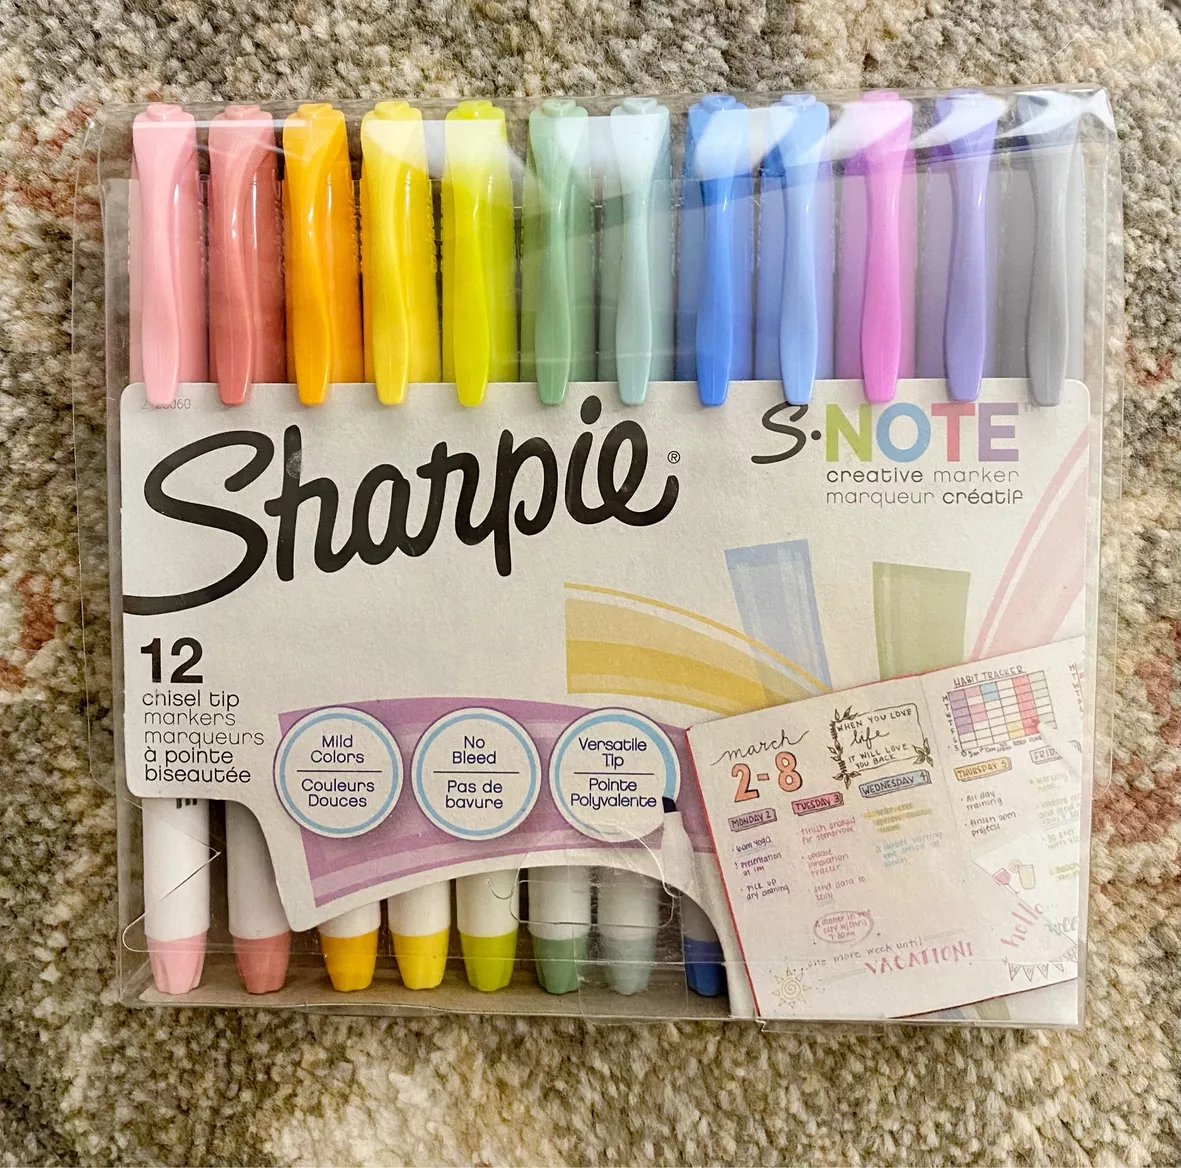 Sharpie S-note Creative Markers, Assorted Colors, Chisel Tip, 12